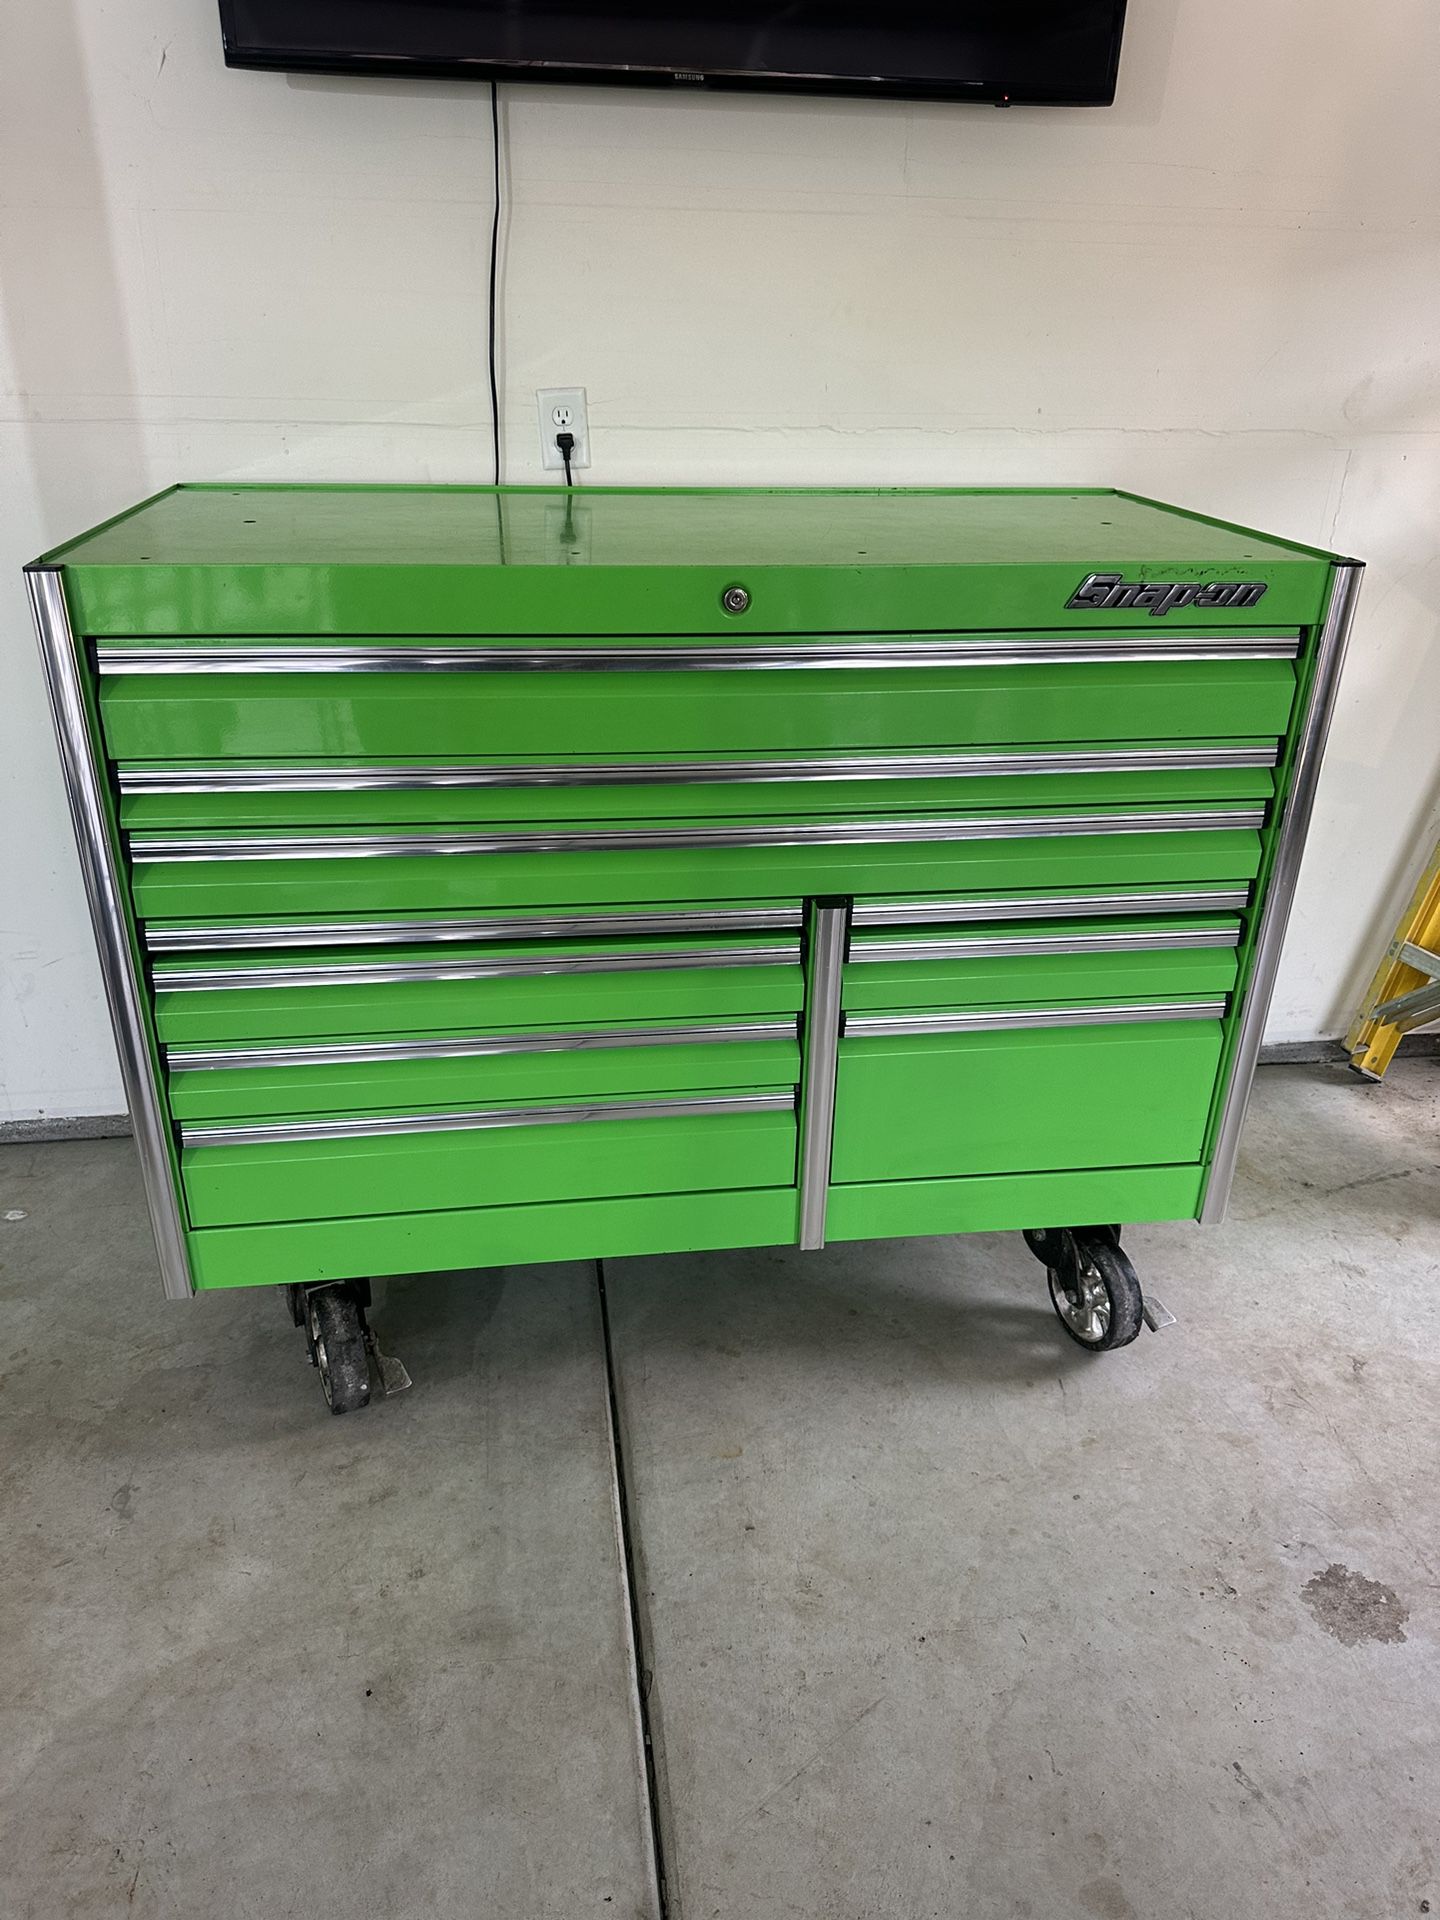 Snap On Epiq Toolbox For Sale Or Trade